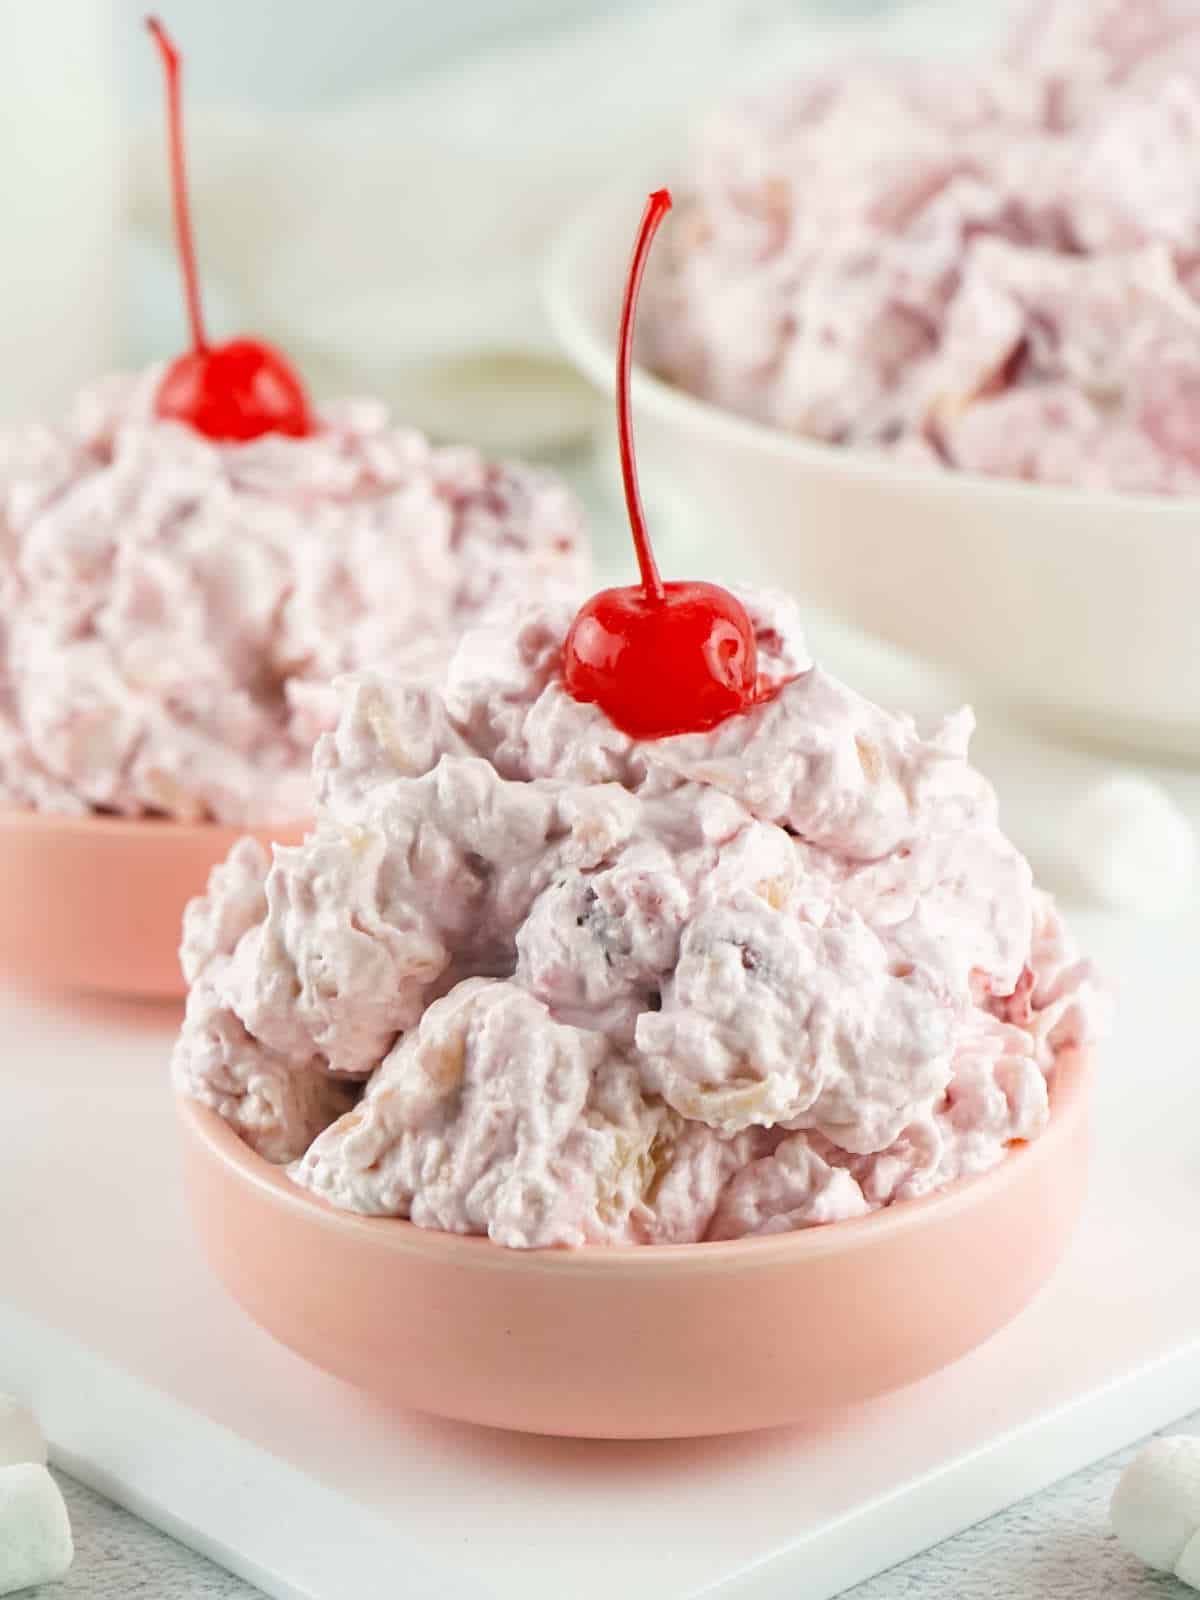 two pink serving bowls of Cherry fluff.